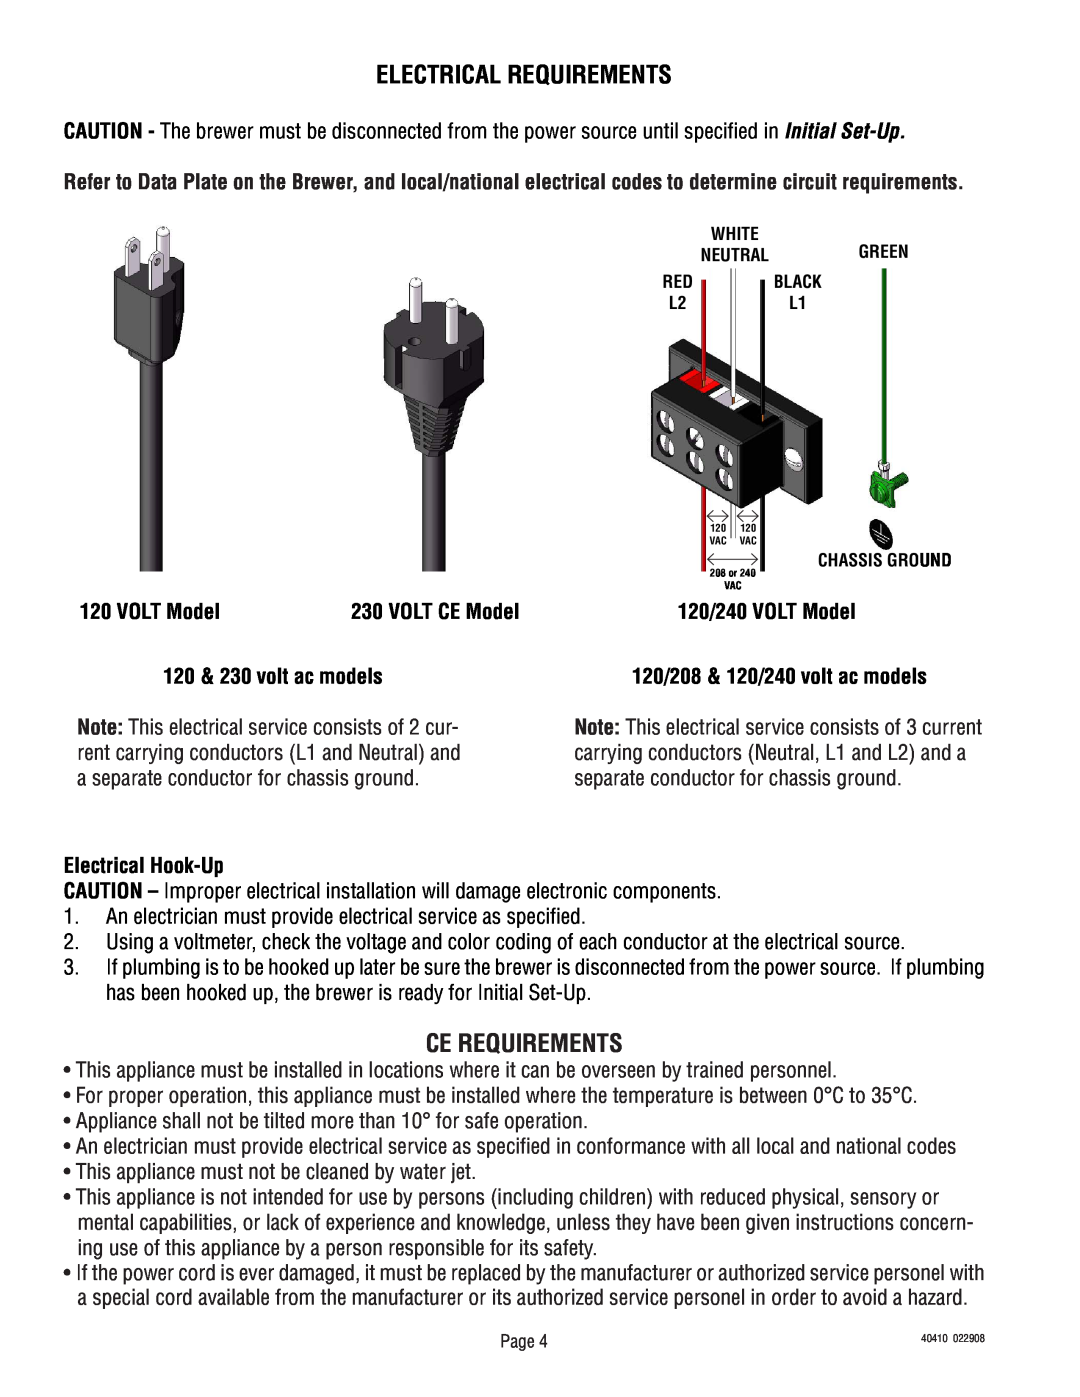 Bunn Smart Wave Series Electrical Requirements, Ce Requirements, VOLT CE Model, 120/240 VOLT Model, Electrical Hook-Up 